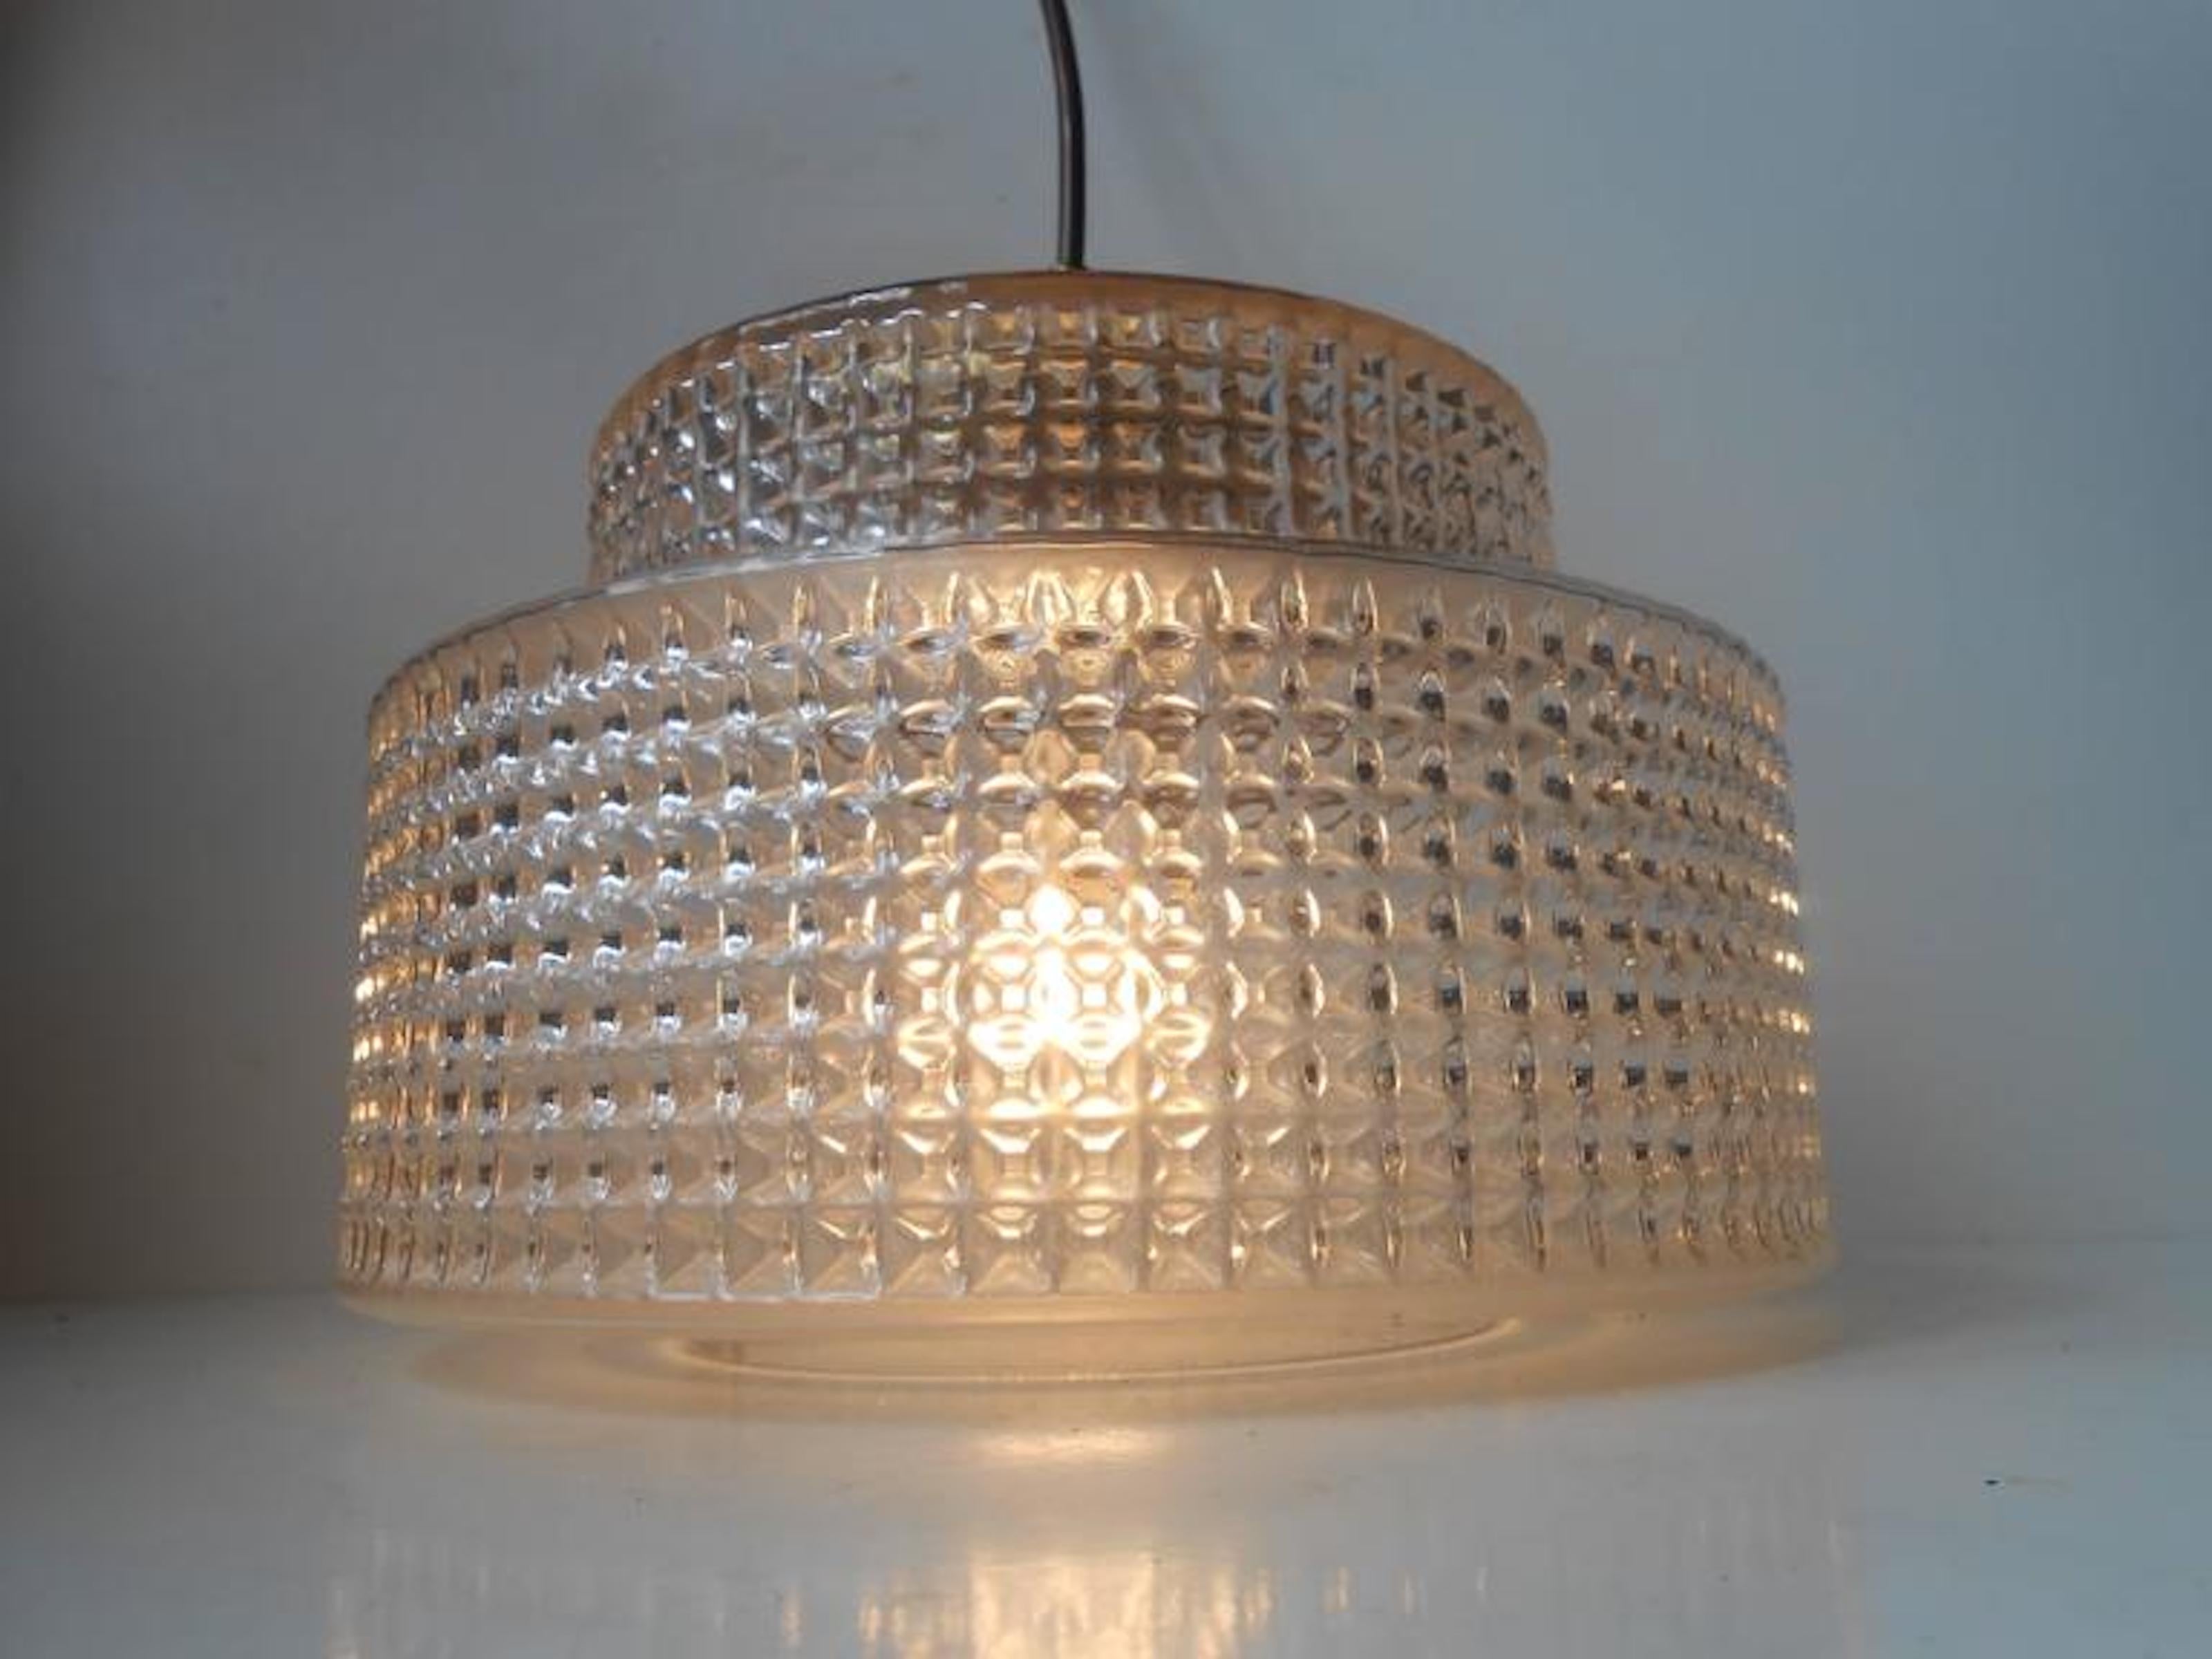 This pendant light was designed and manufactured by Danish design trio Vitrika in the 1960s. The name Vitrika, or Vi-Tri-Ka means 'The three of us can do it'. The lamp features a geometric, diamond patterned clear glass shade. The socket and tube is